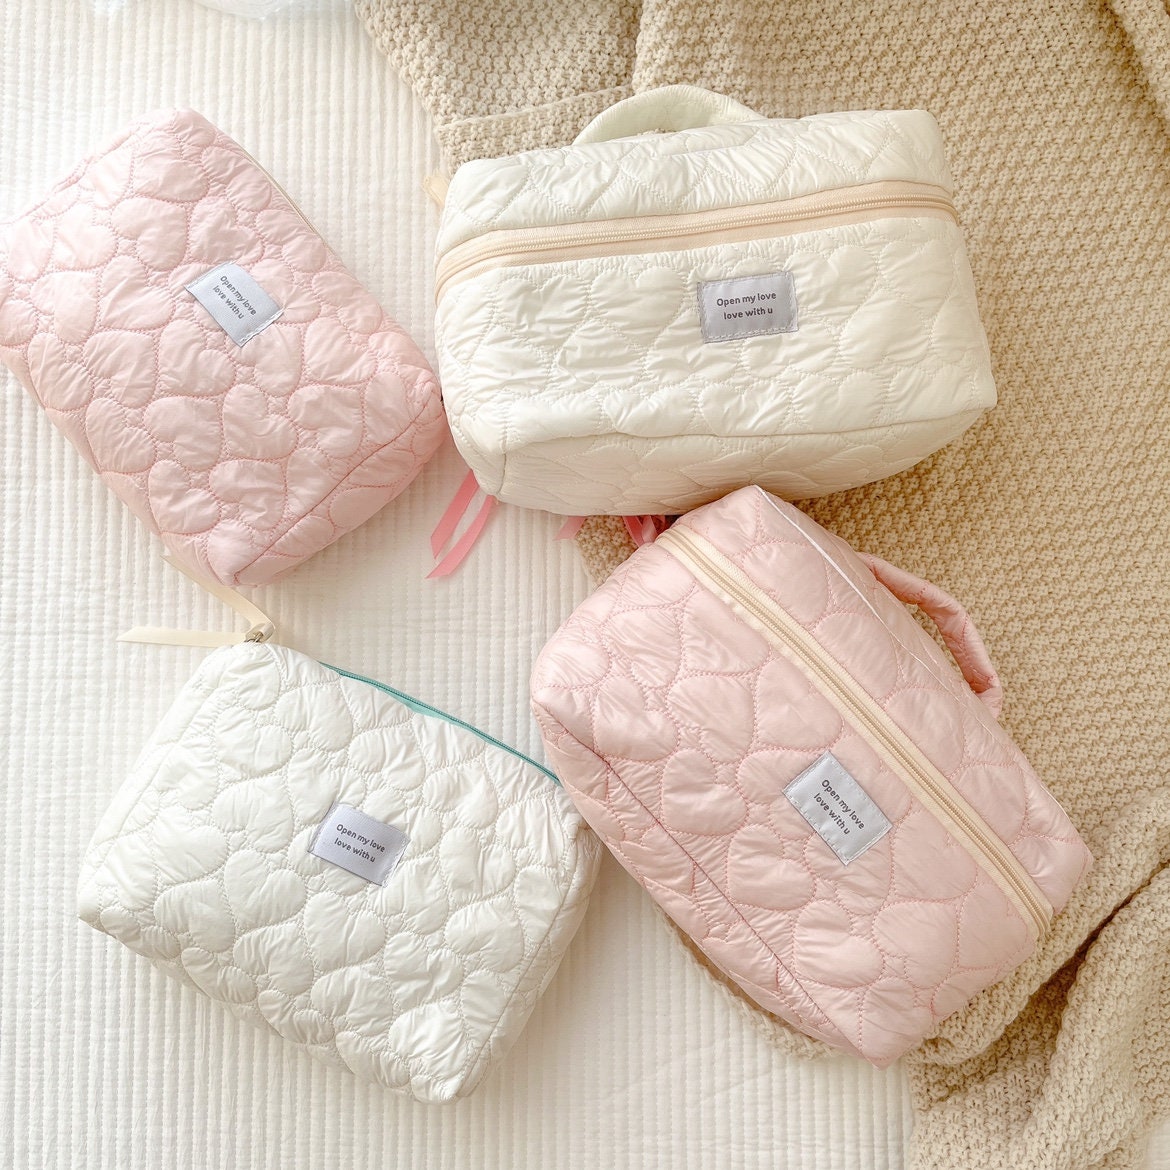 Small Makeup Bag, Make Up Bags with Zipper, Cute Makeup Pouch